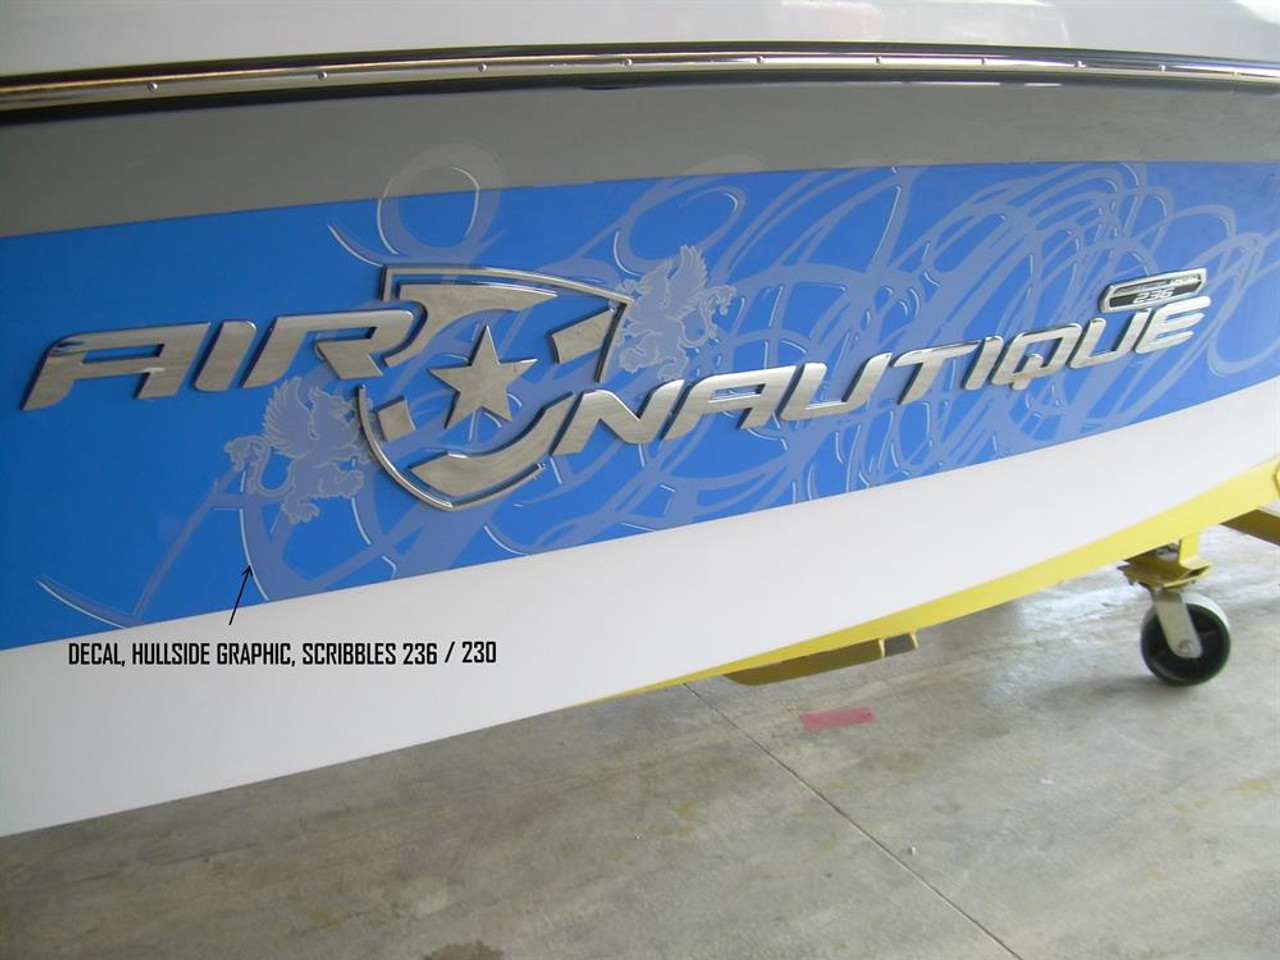 DECAL, HULL, GRAPHIC SCRIBBLES 236